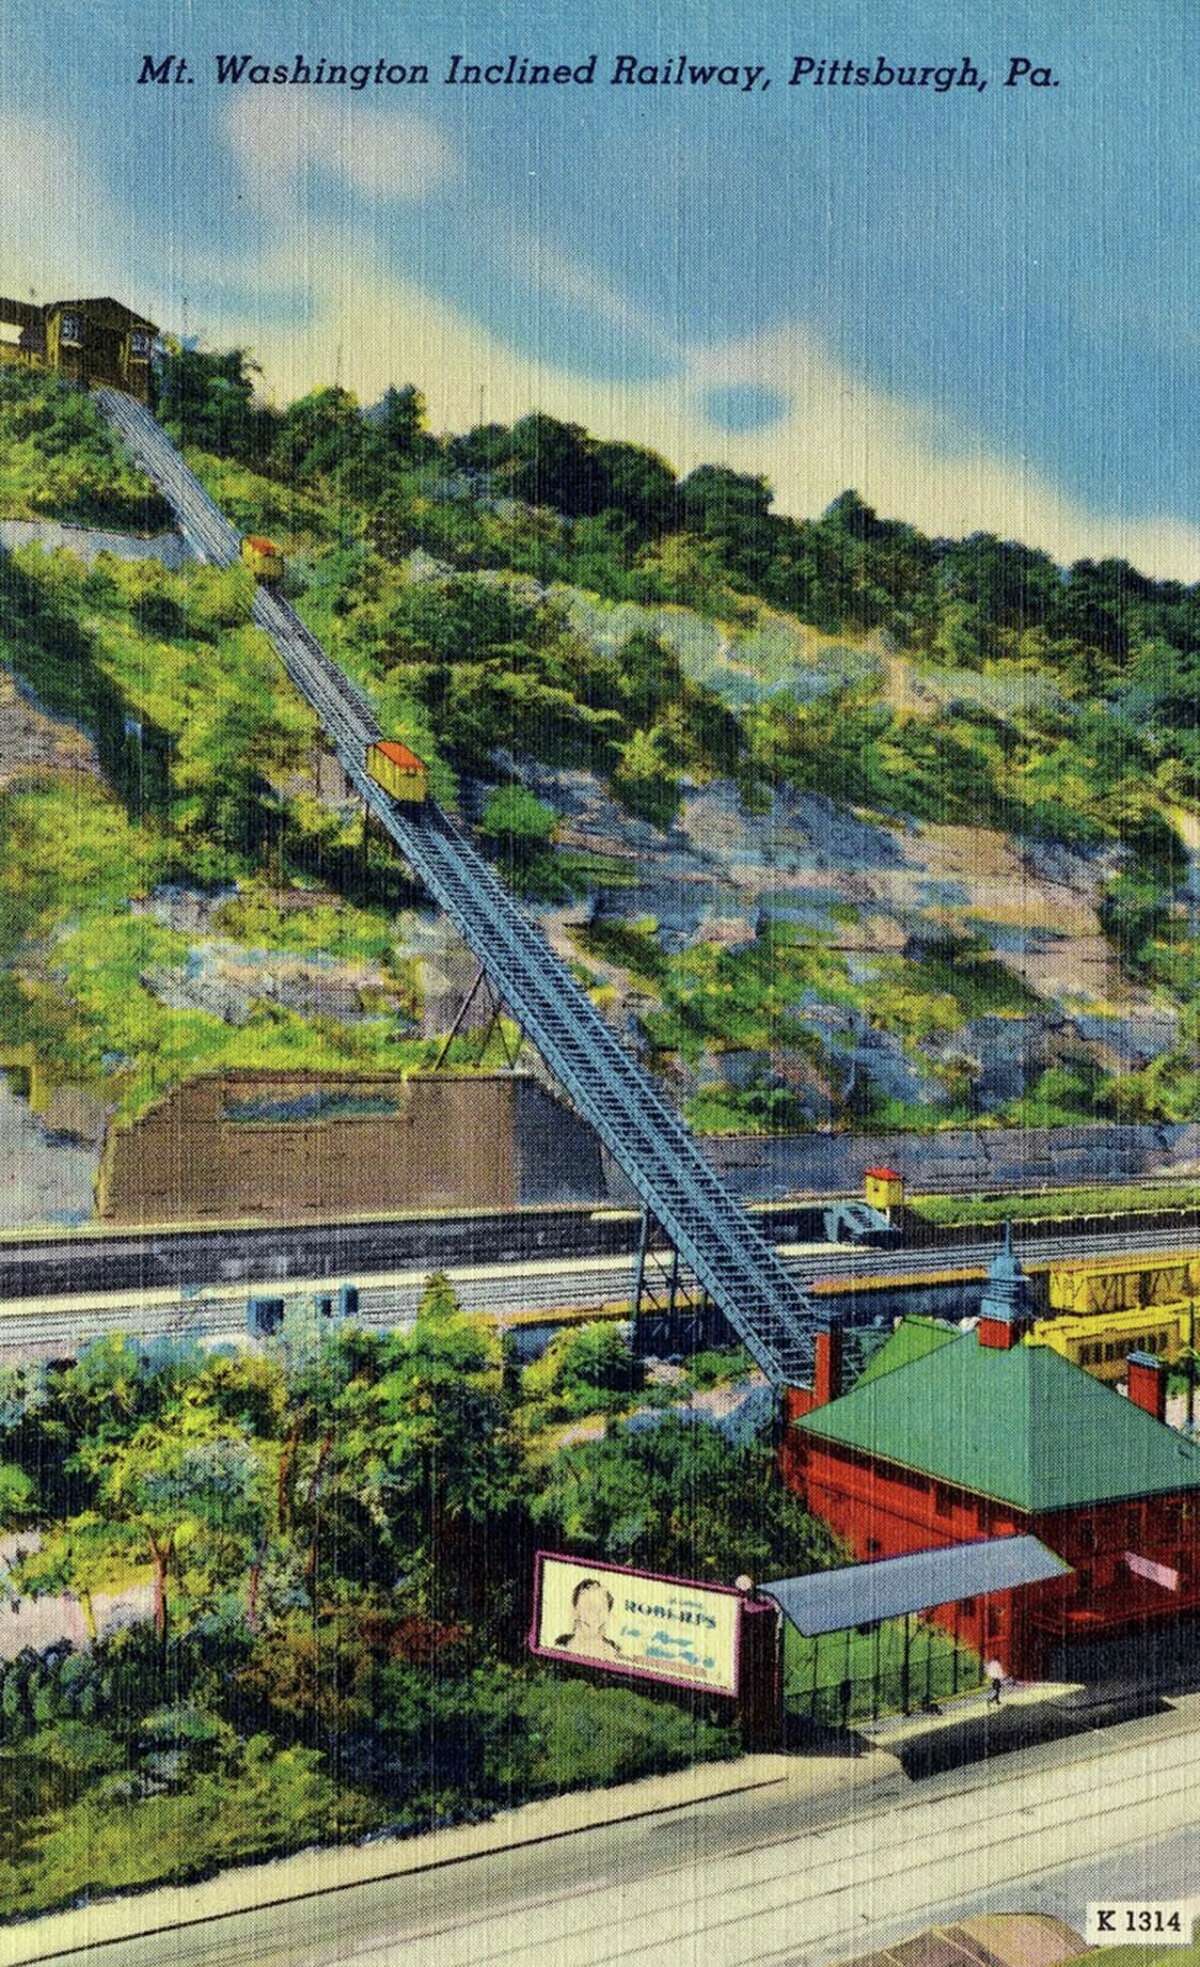 An early postcard view of Pittsburgh’s Mount Washington, showing the incline that still climbs the hill on which an illicit crop was once grown.